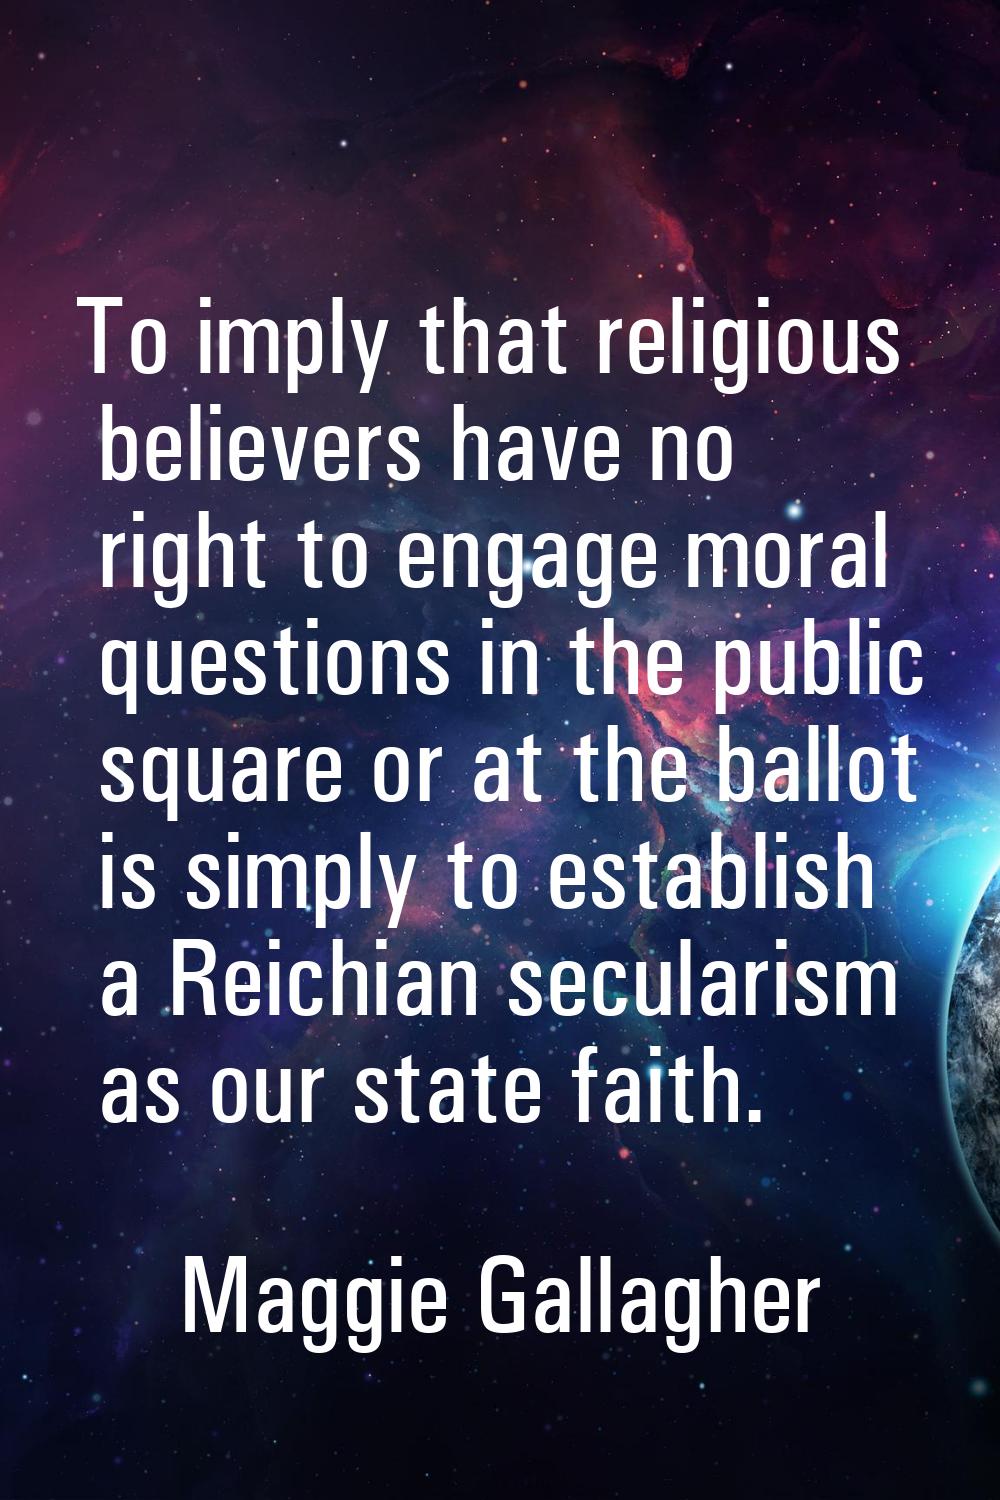 To imply that religious believers have no right to engage moral questions in the public square or a